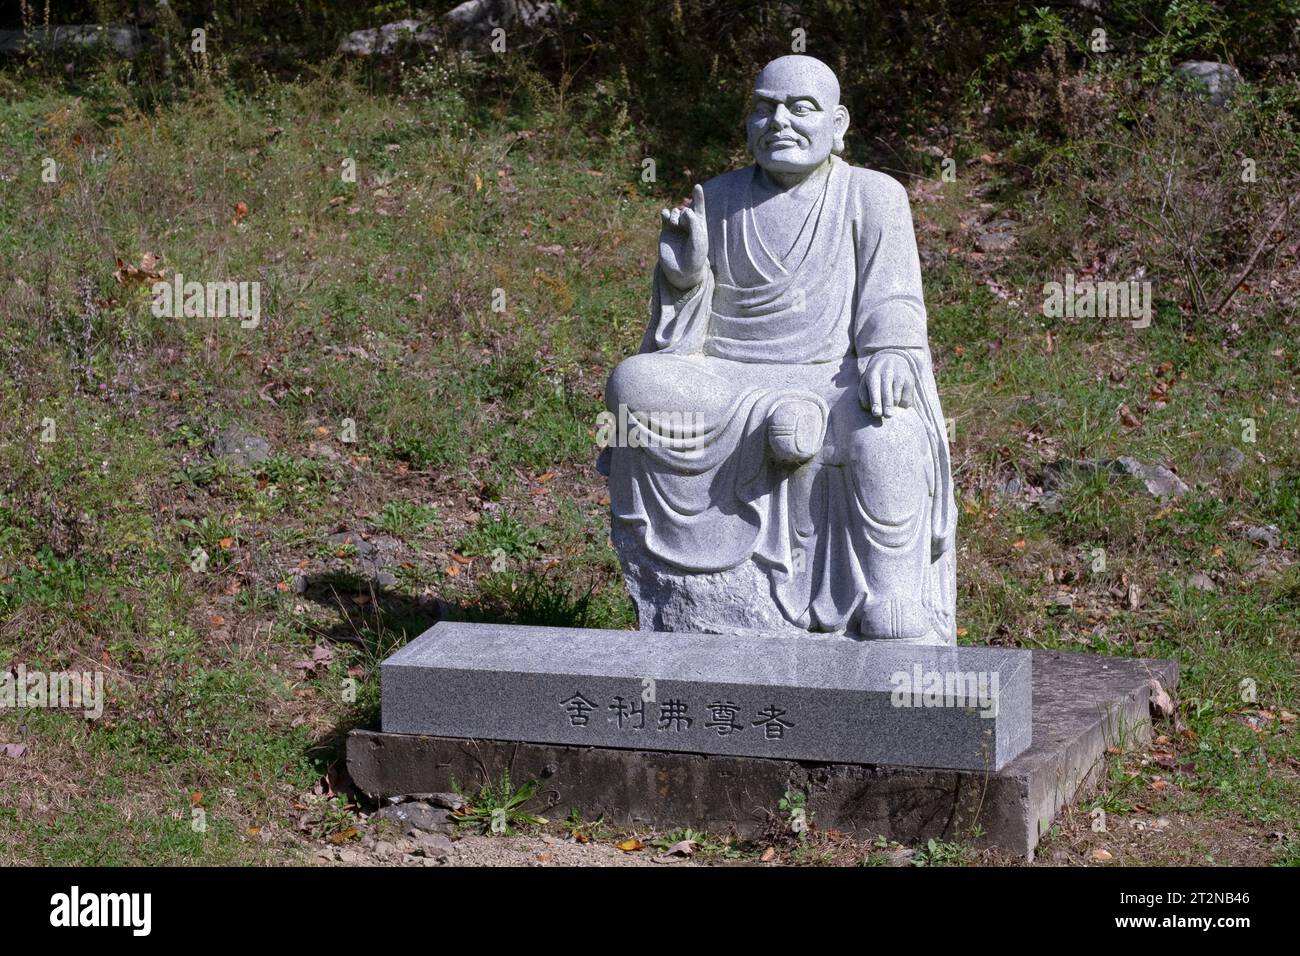 A statue of Sariputta Thera a significant 12th centruy Sri Lankan Monk. On the path to the Chuang Yen Buddhist Monastery in Carmel, Putnam County, NY. Stock Photo